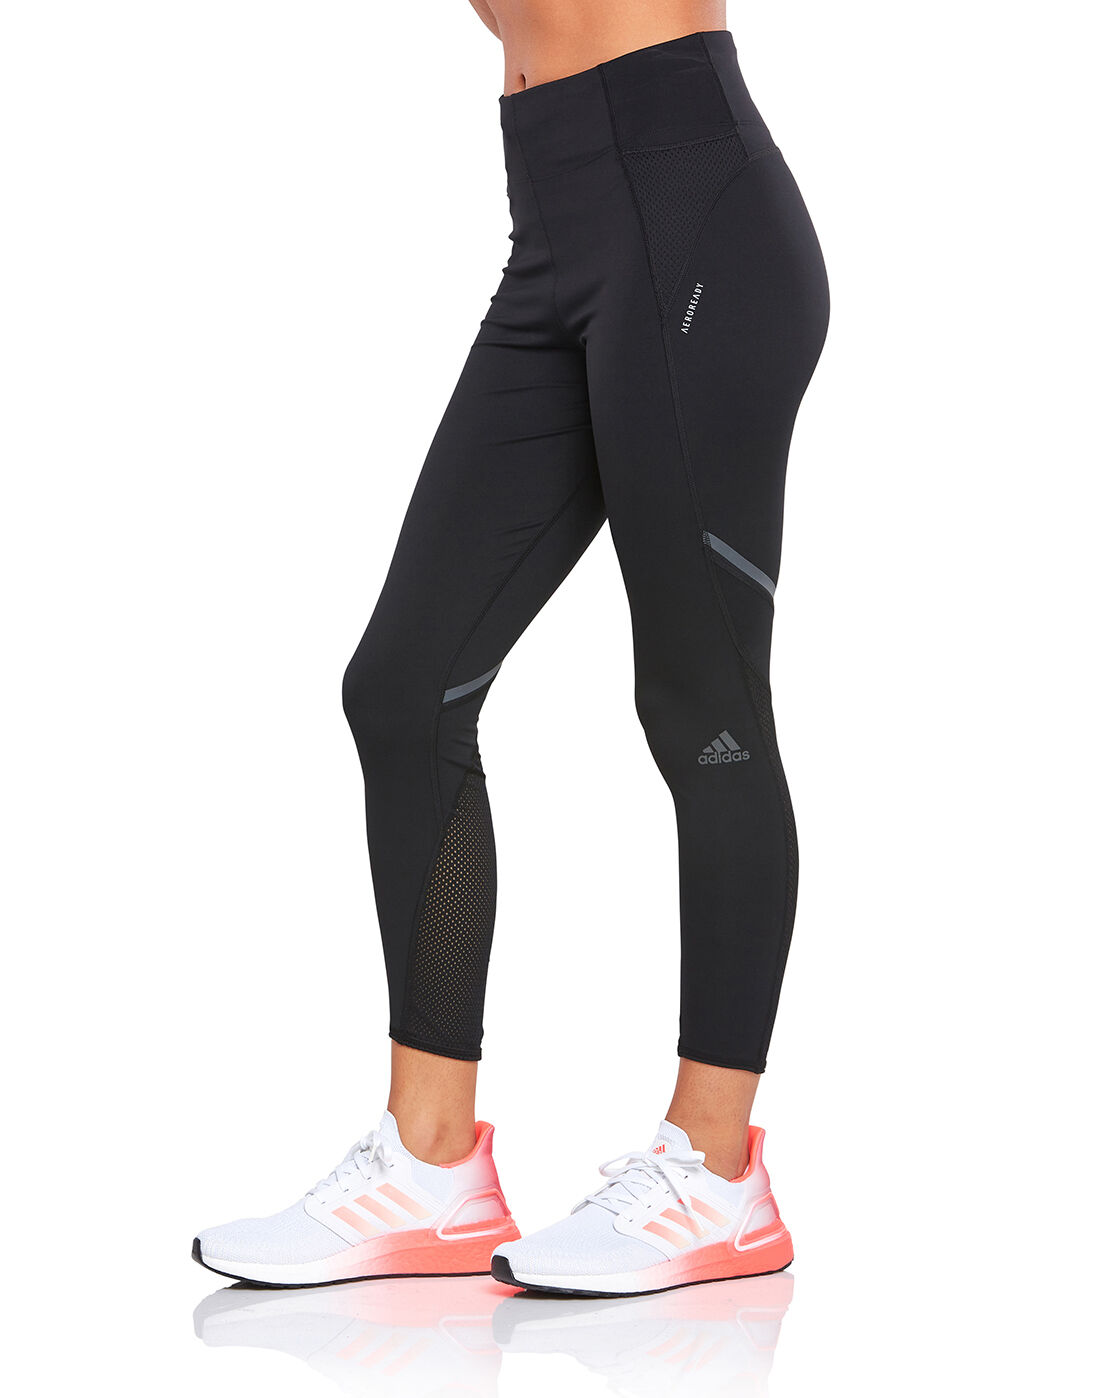 nike women's tights suit